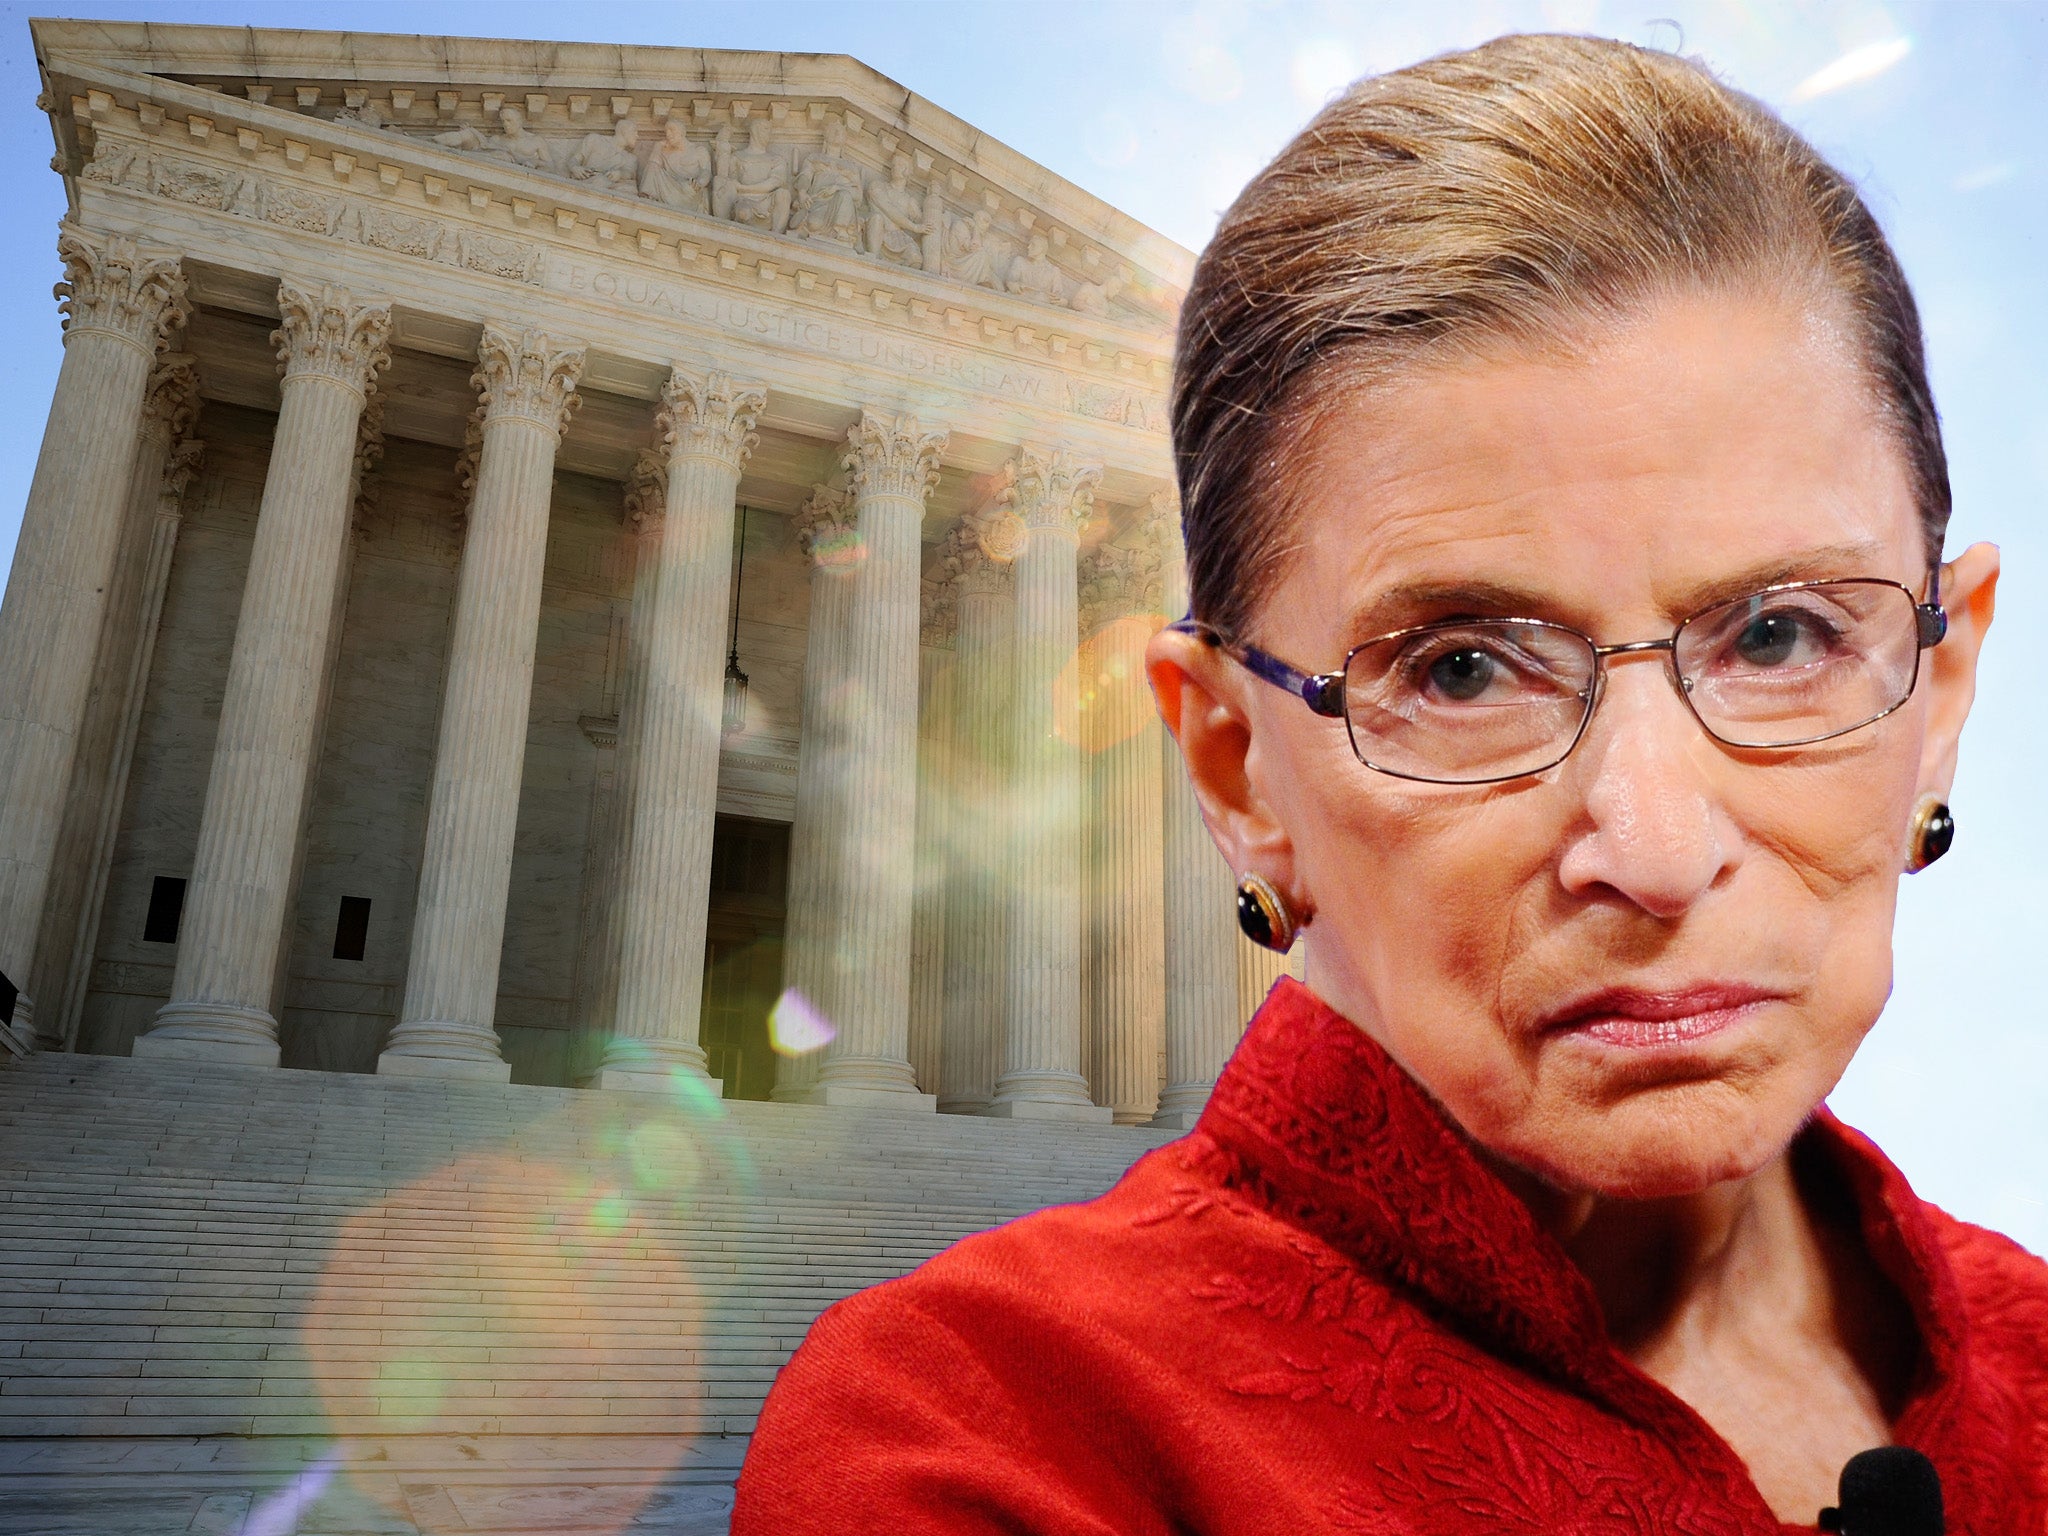 Justice Ruth Bader Ginsburg died in 2020 at the age of 87